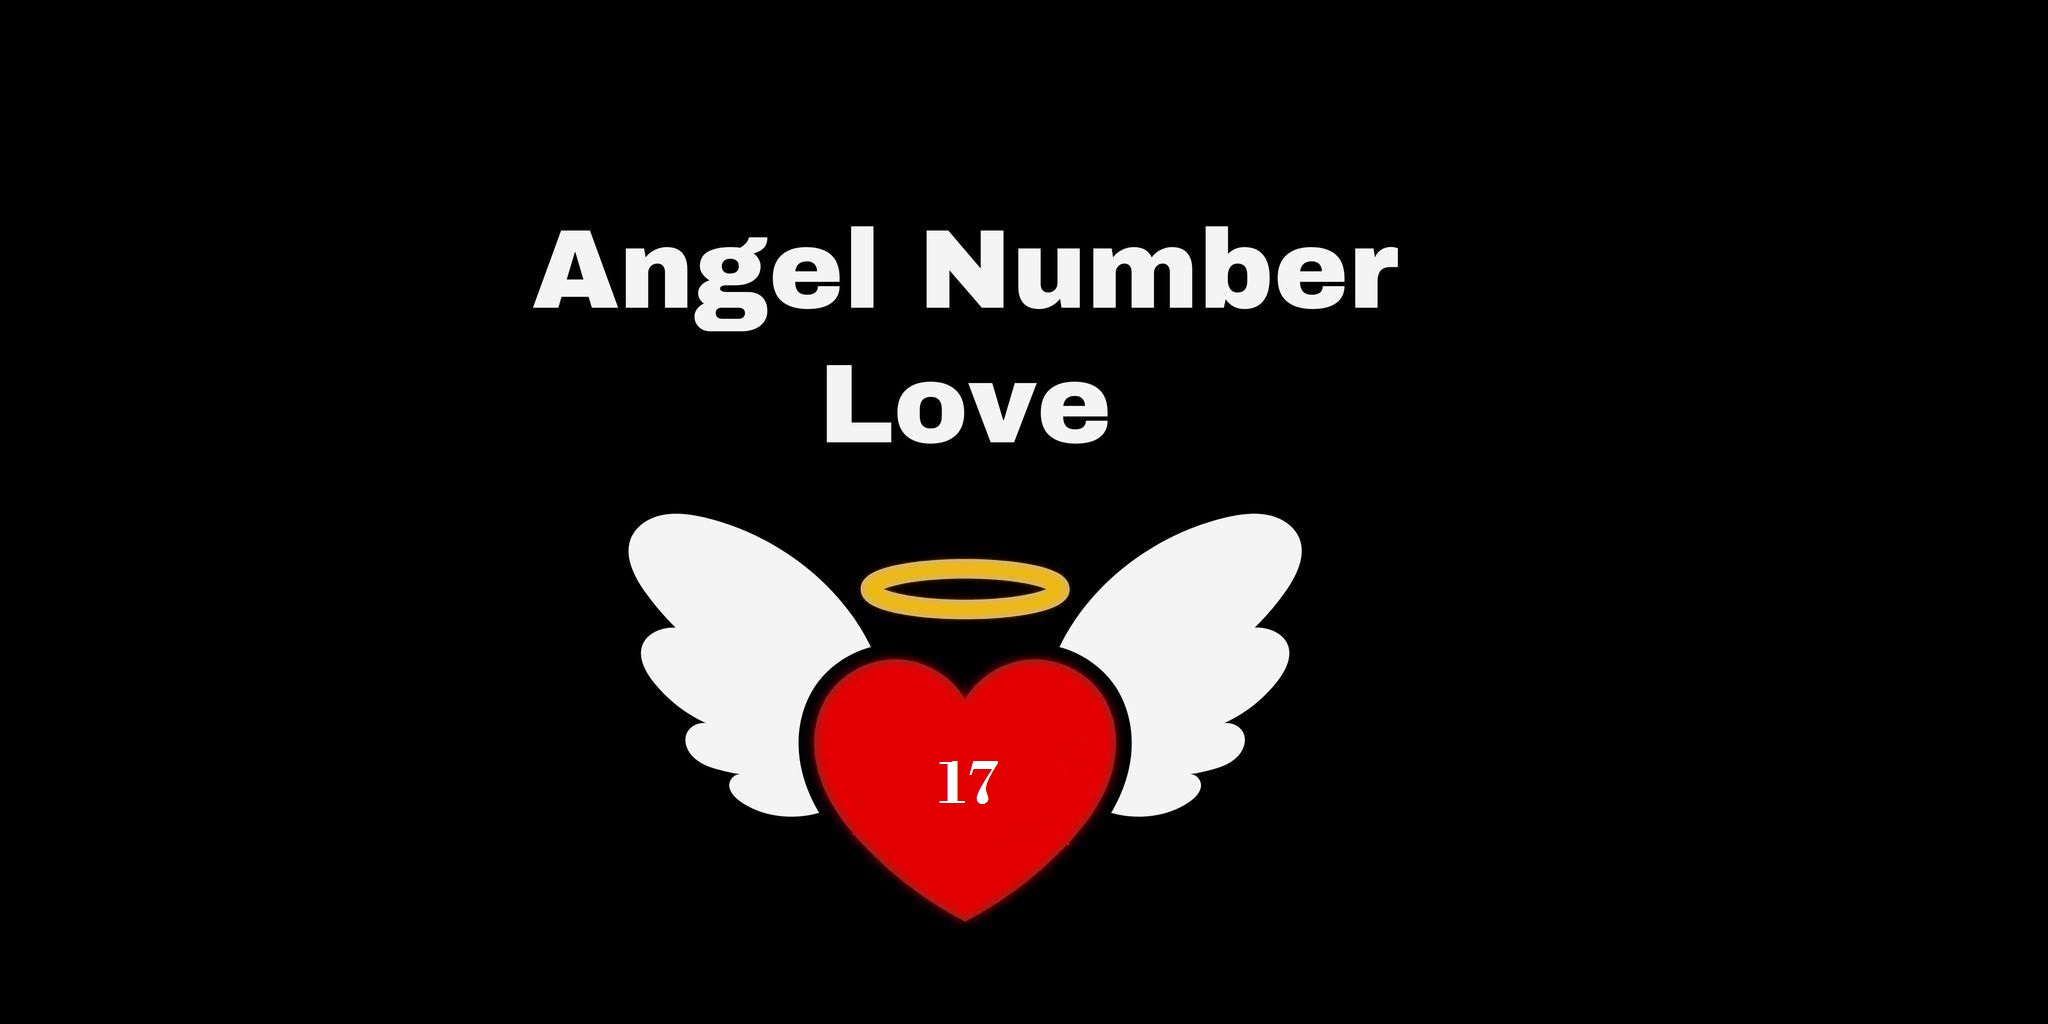 17 Angel Number Meaning In Love